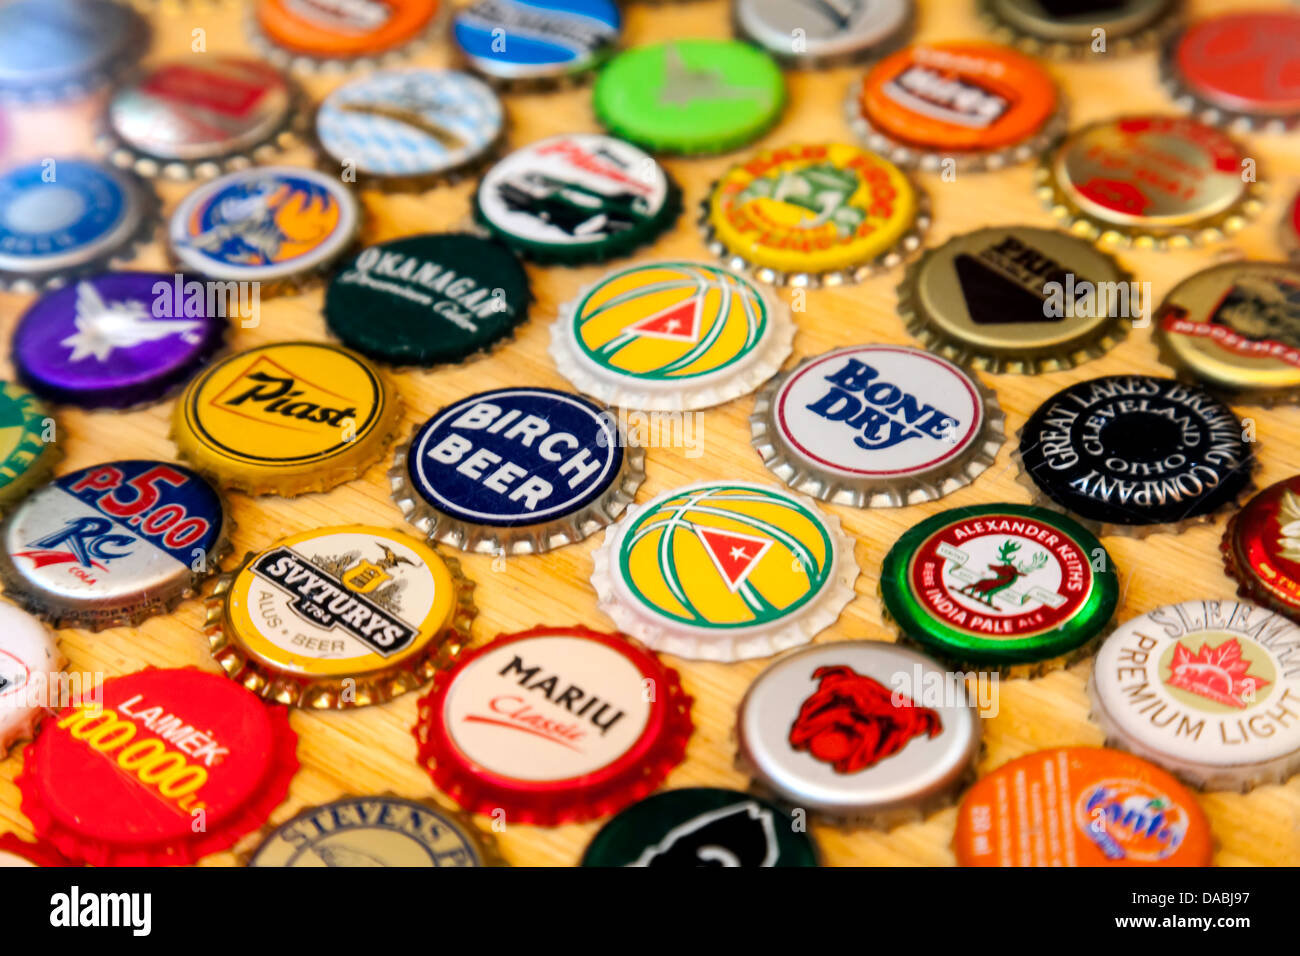 Colorful beer and beverage bottle caps laminated into a countertop. Stock Photo